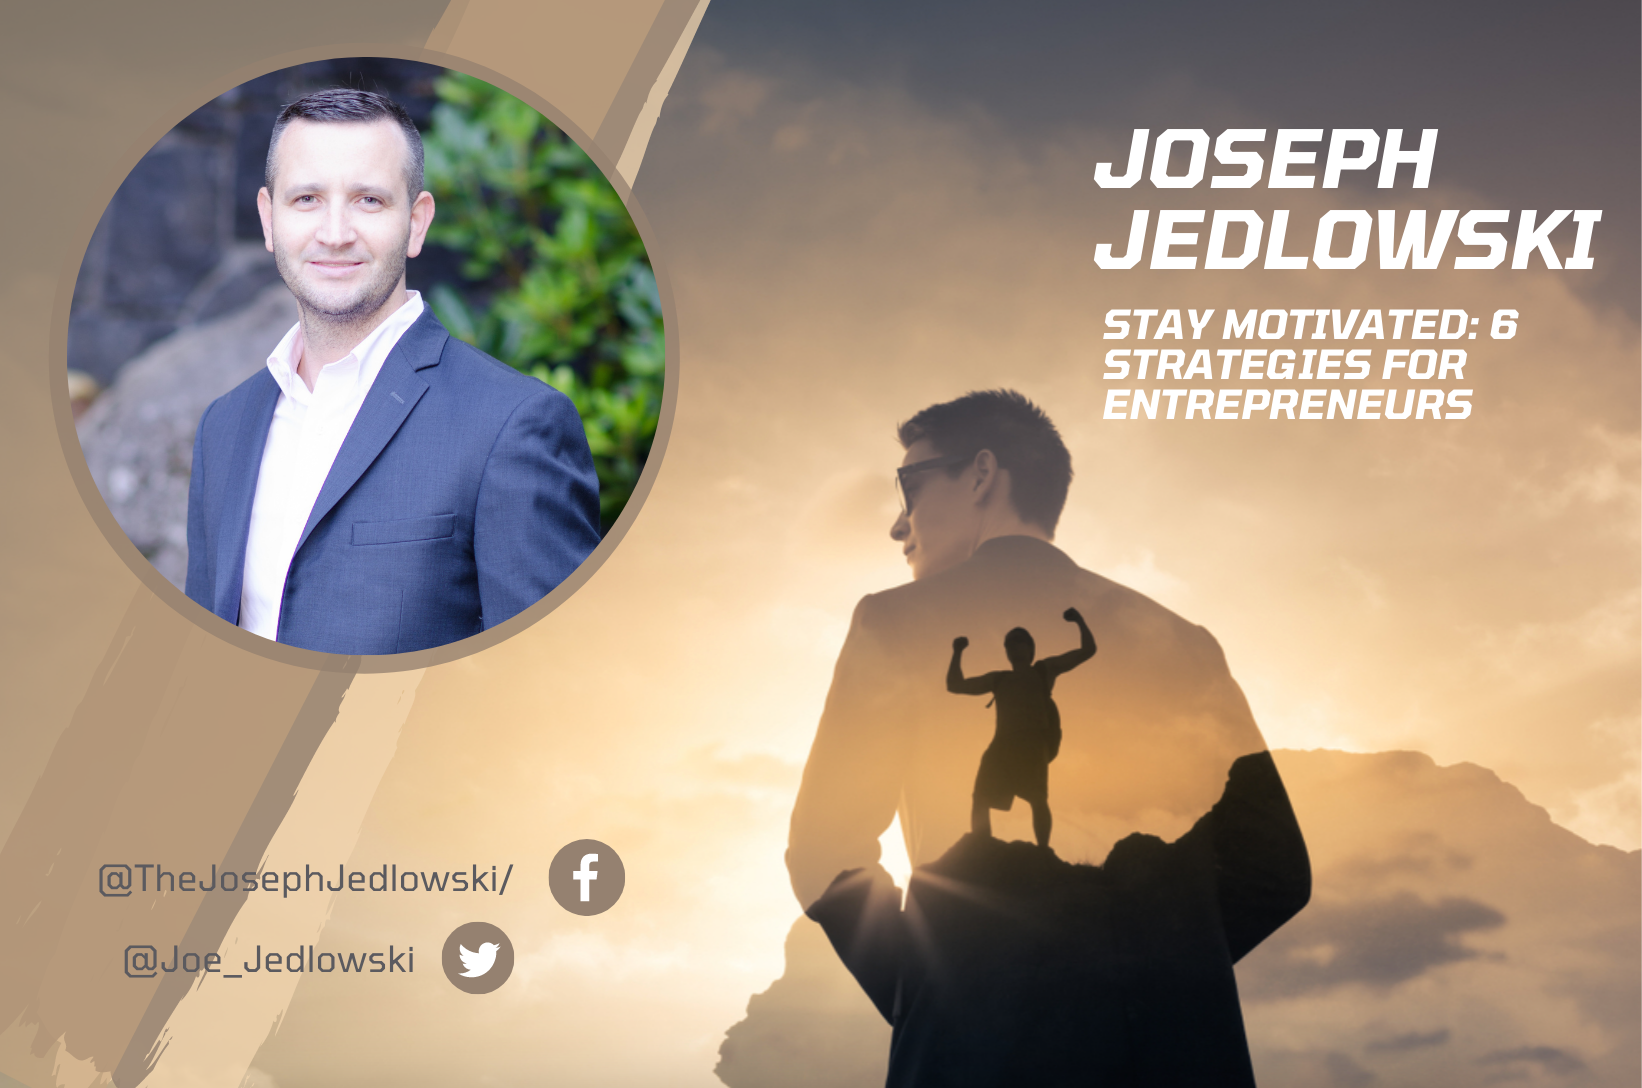 Struggling To Stay Motivated? Joseph Jedlowski Shares 6 Strategies For Entrepreneurs To Implement [2022 Guide]